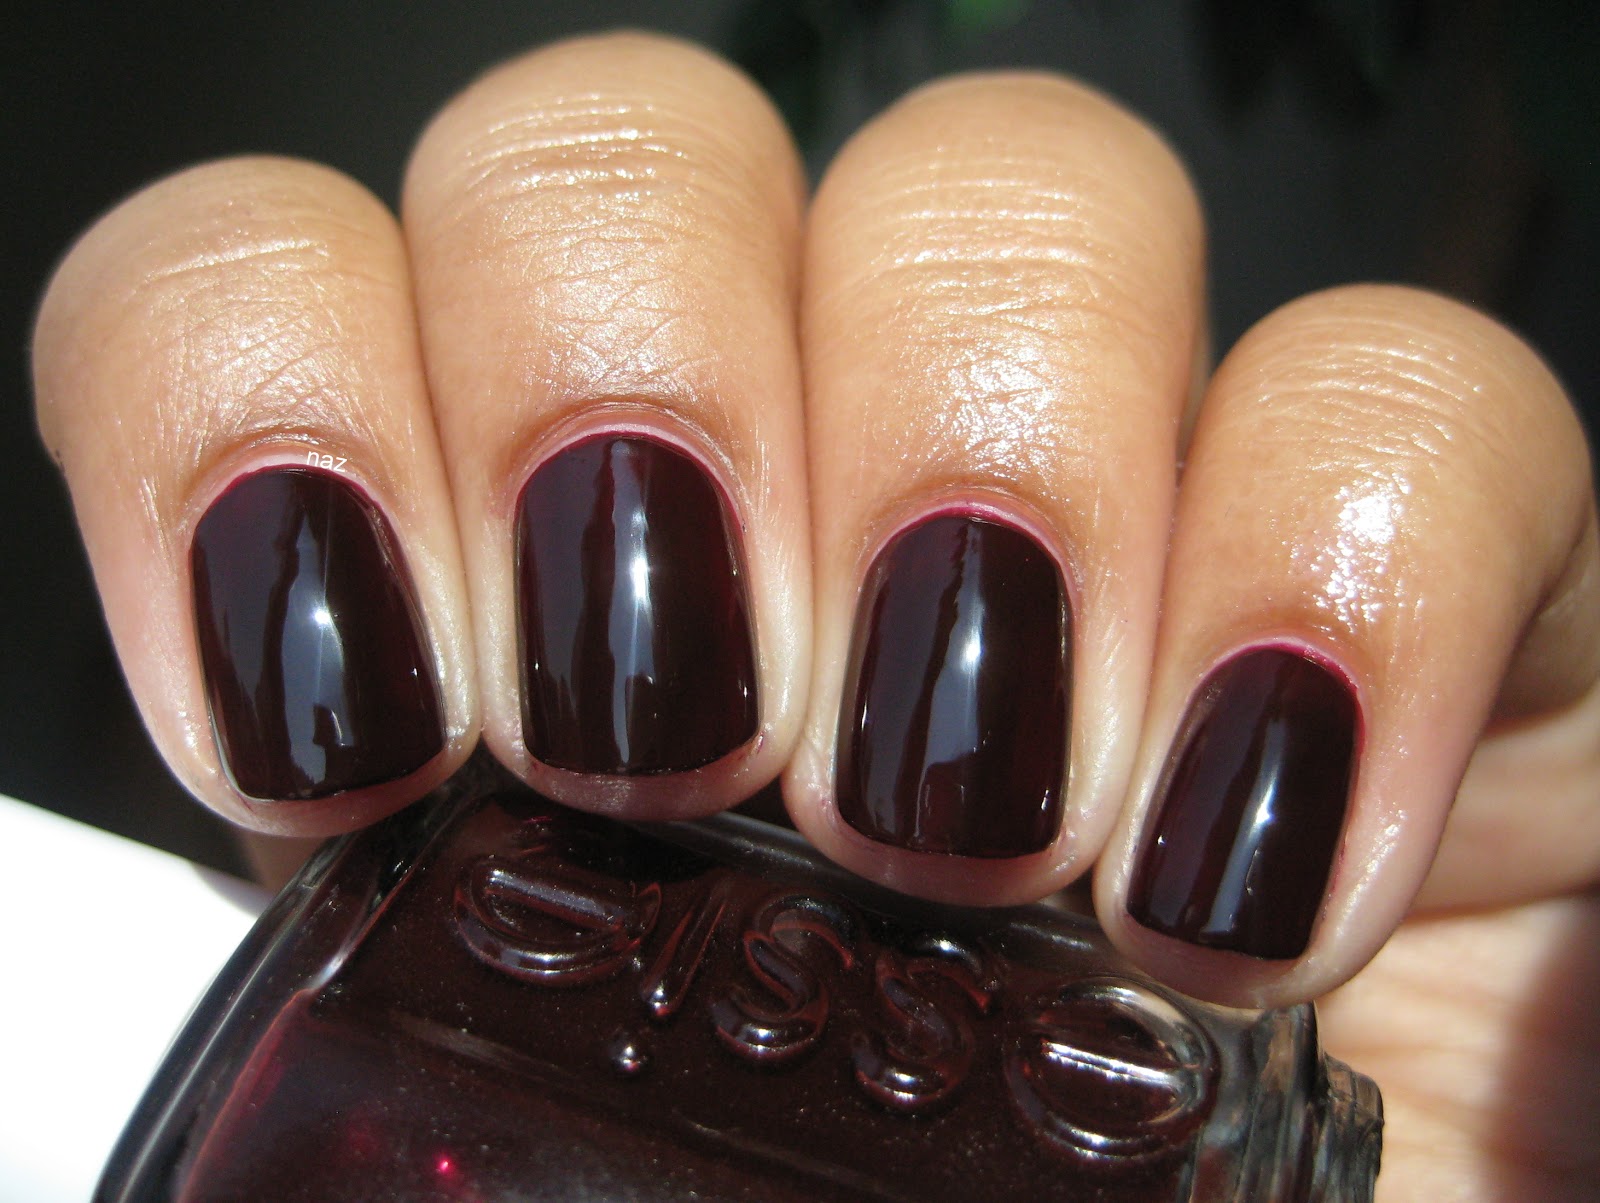 7. Essie Nail Polish in "Wicked" - wide 2